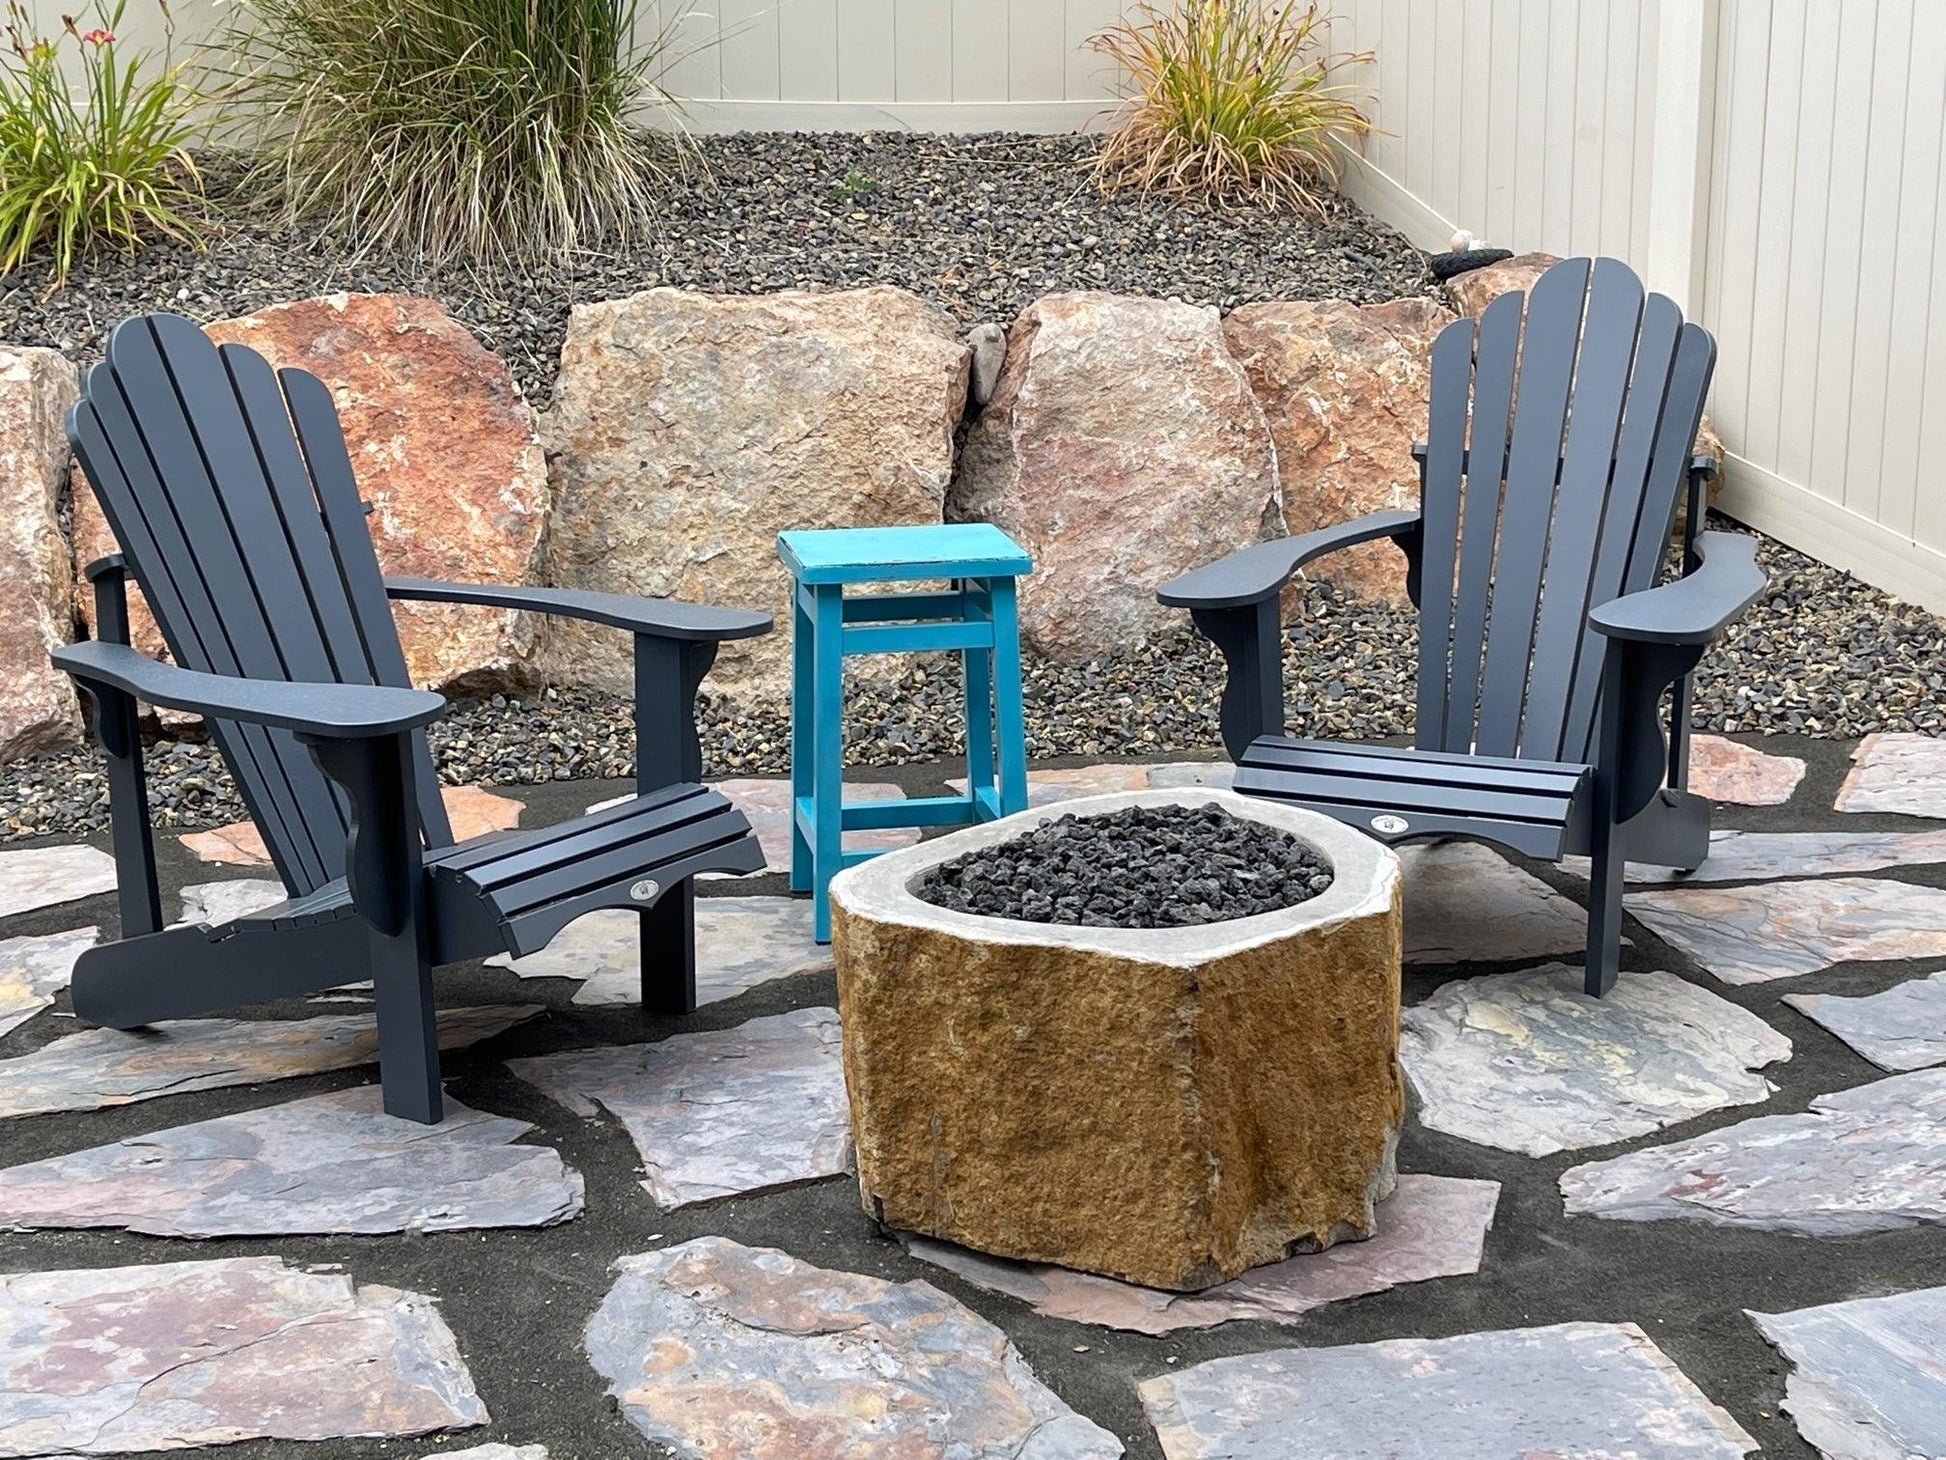 Long, Narrow Natural Stone Gas Fire Pit, Andesite / Basalt - ANDE-L003 - Impact Imports